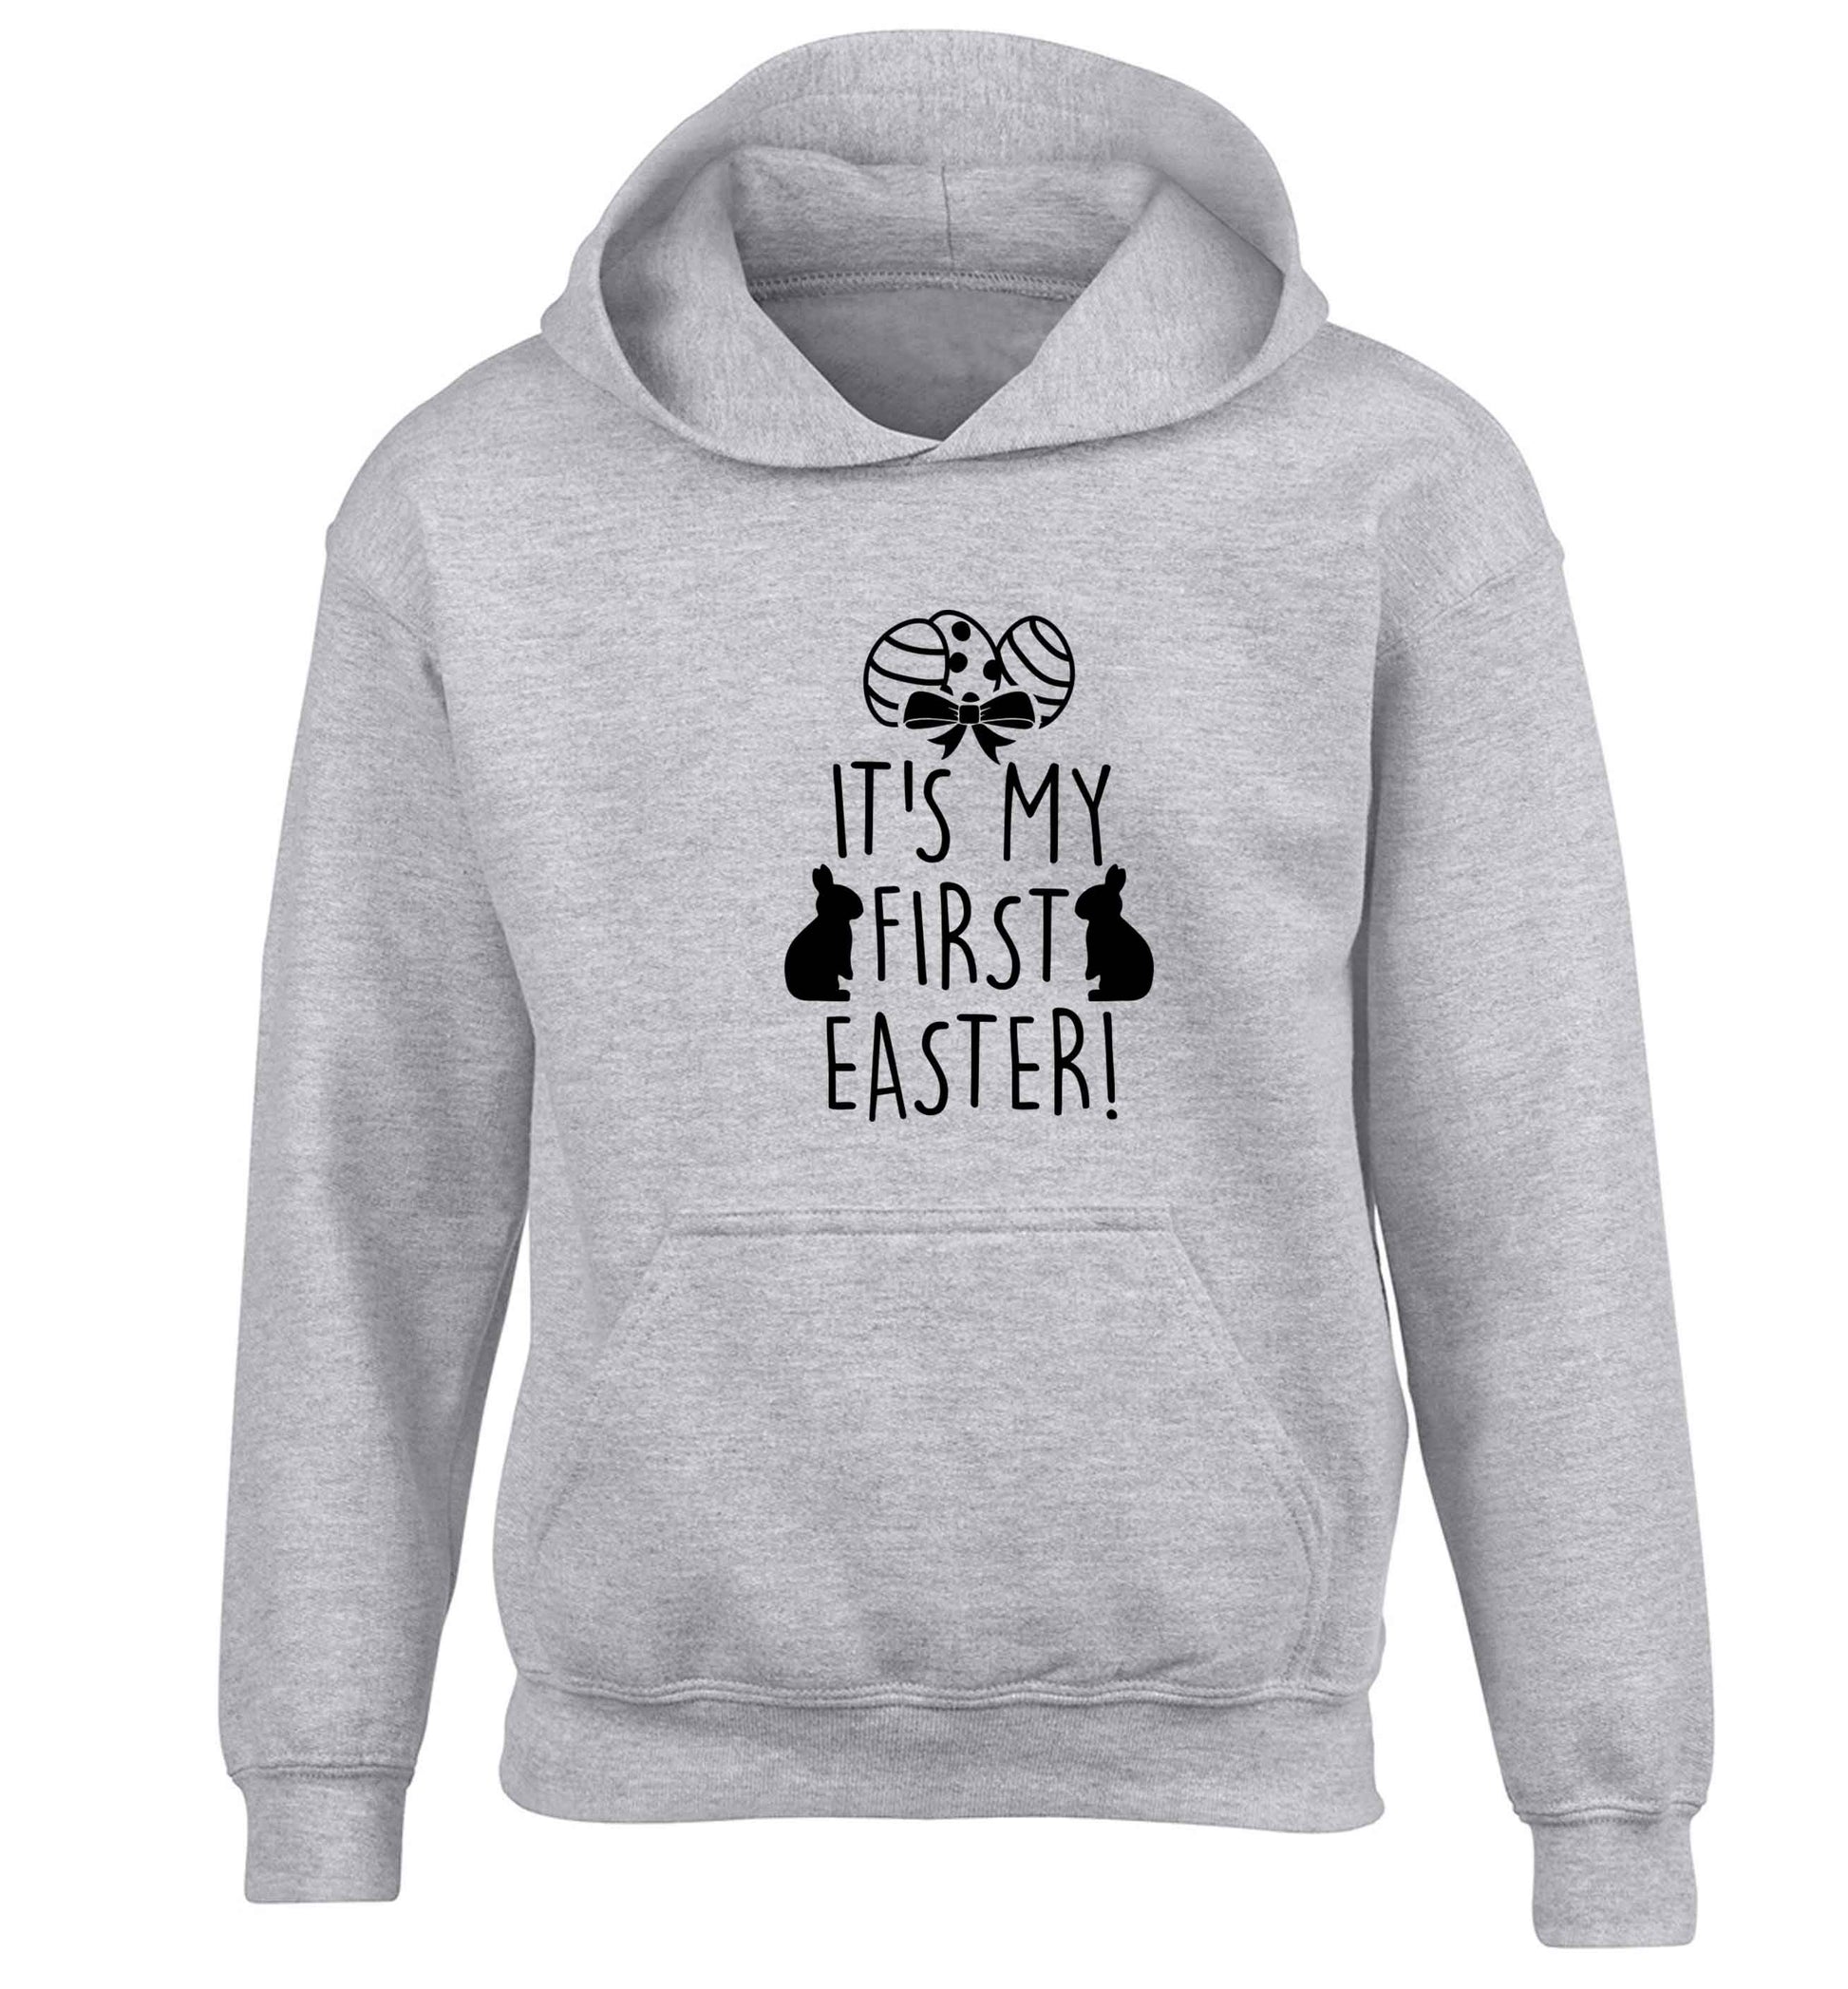 It's my first Easter children's grey hoodie 12-13 Years